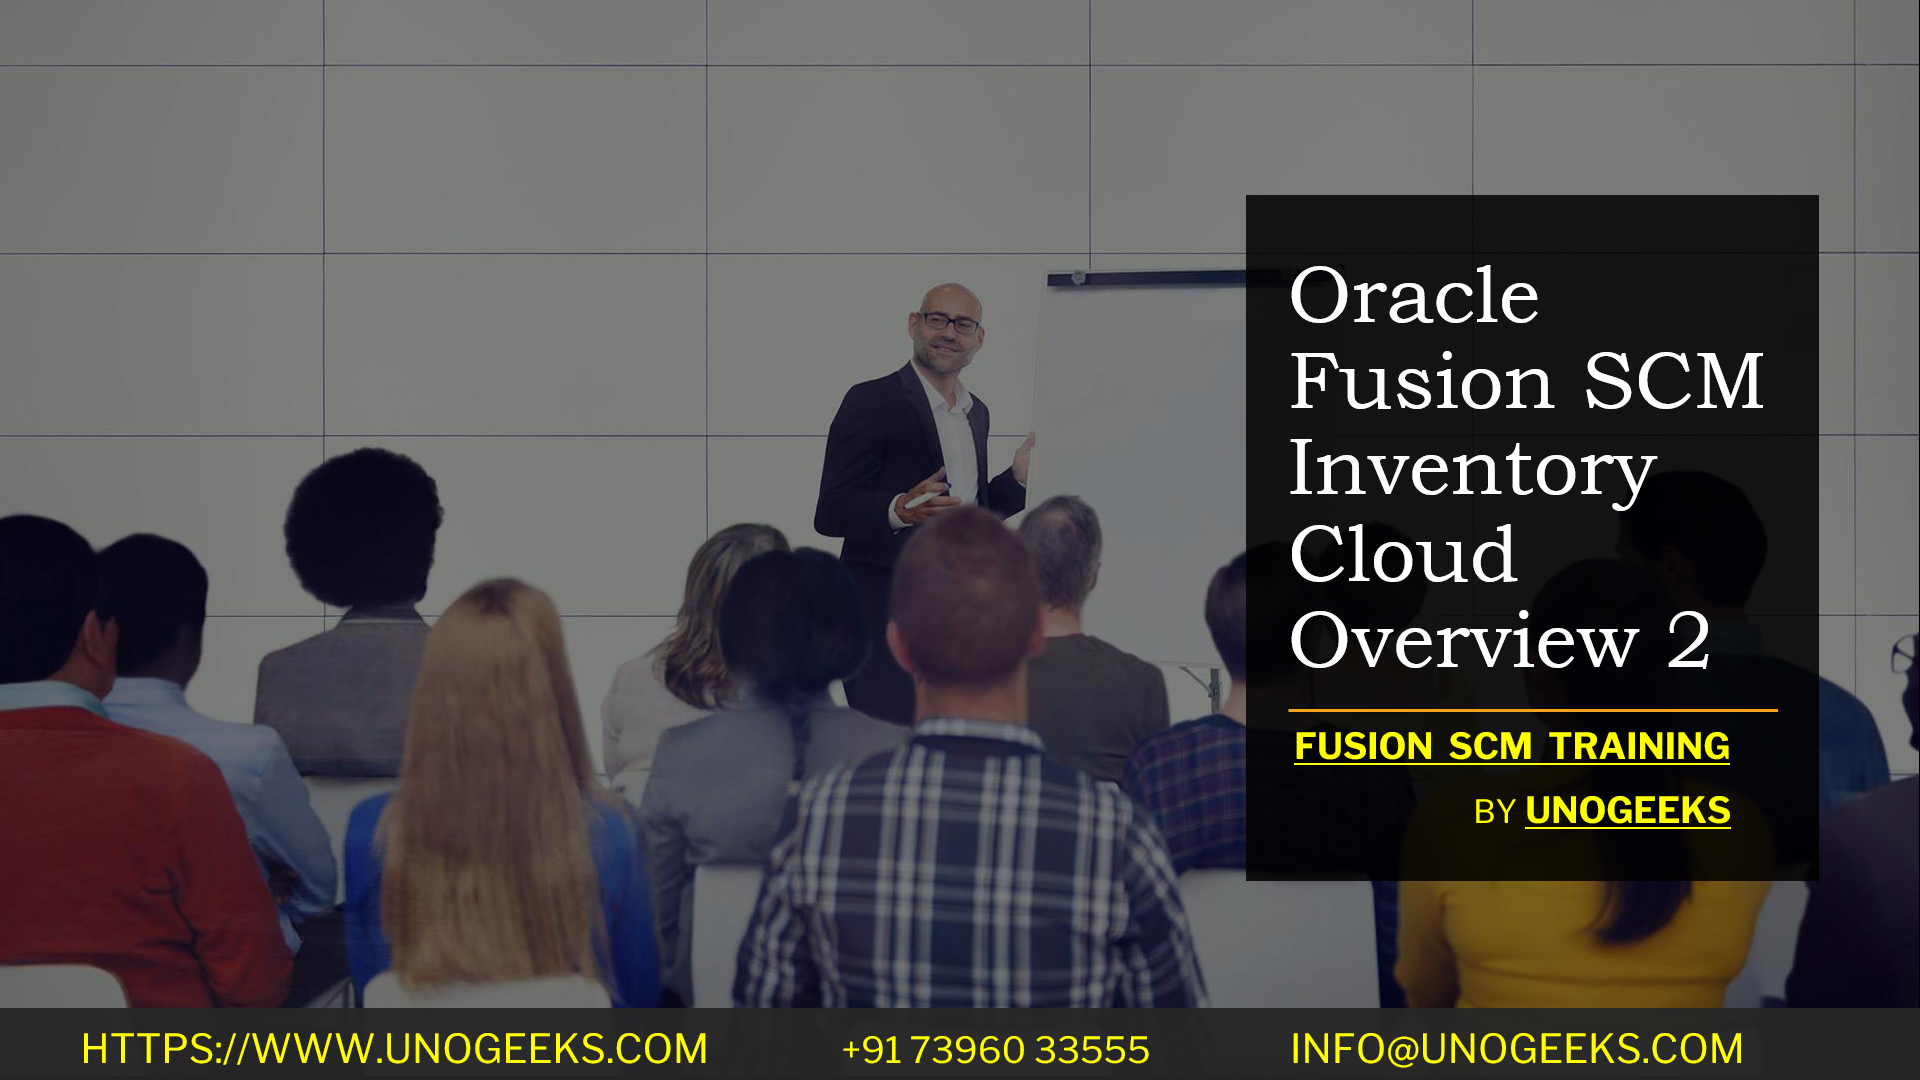 Oracle Fusion SCM Inventory Cloud Overview 2